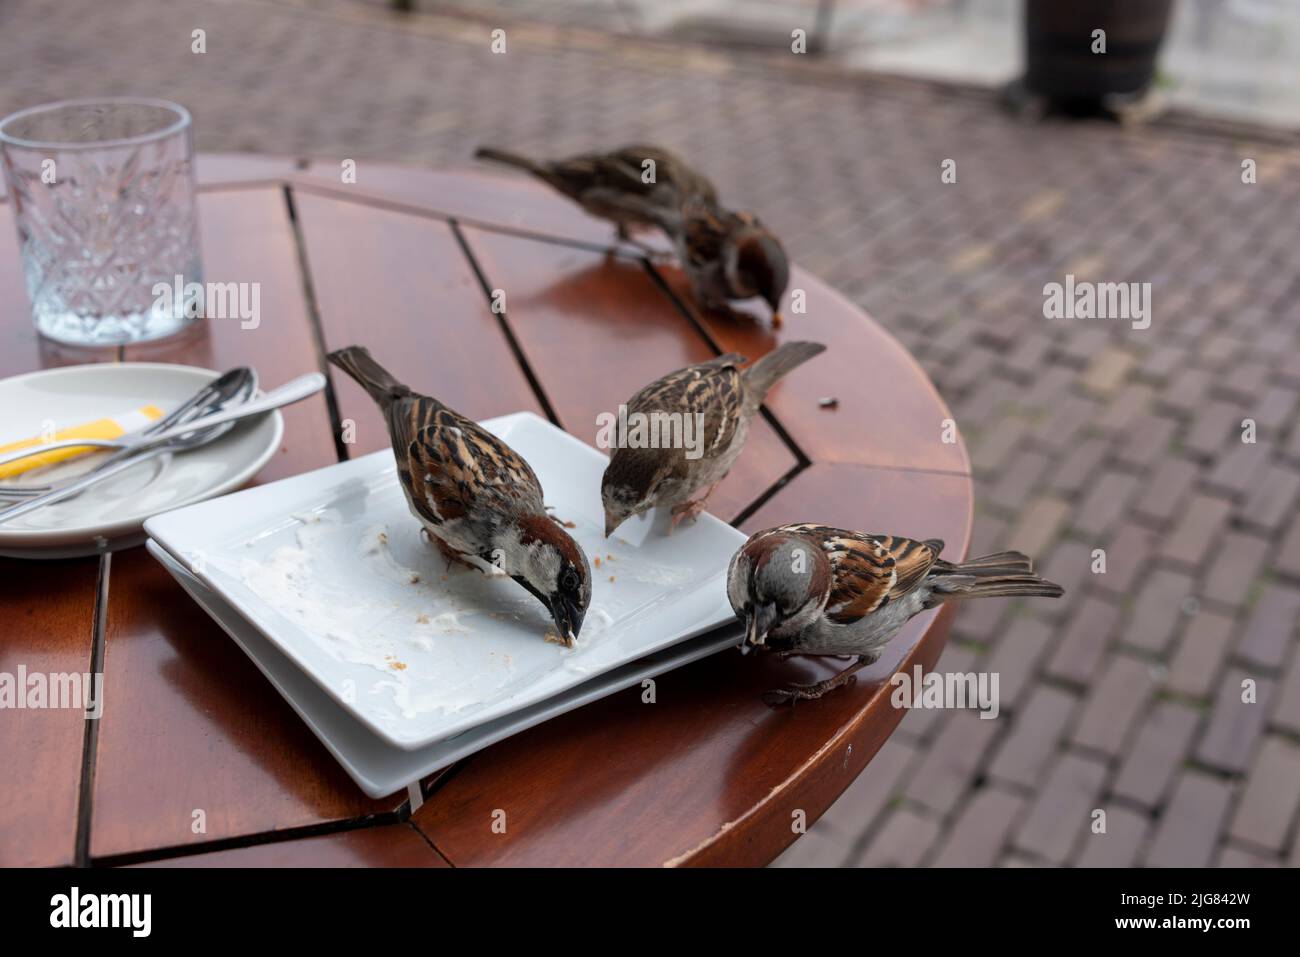 Several sparrows are sitting on a table eating the crumbs of a cake. Stock Photo